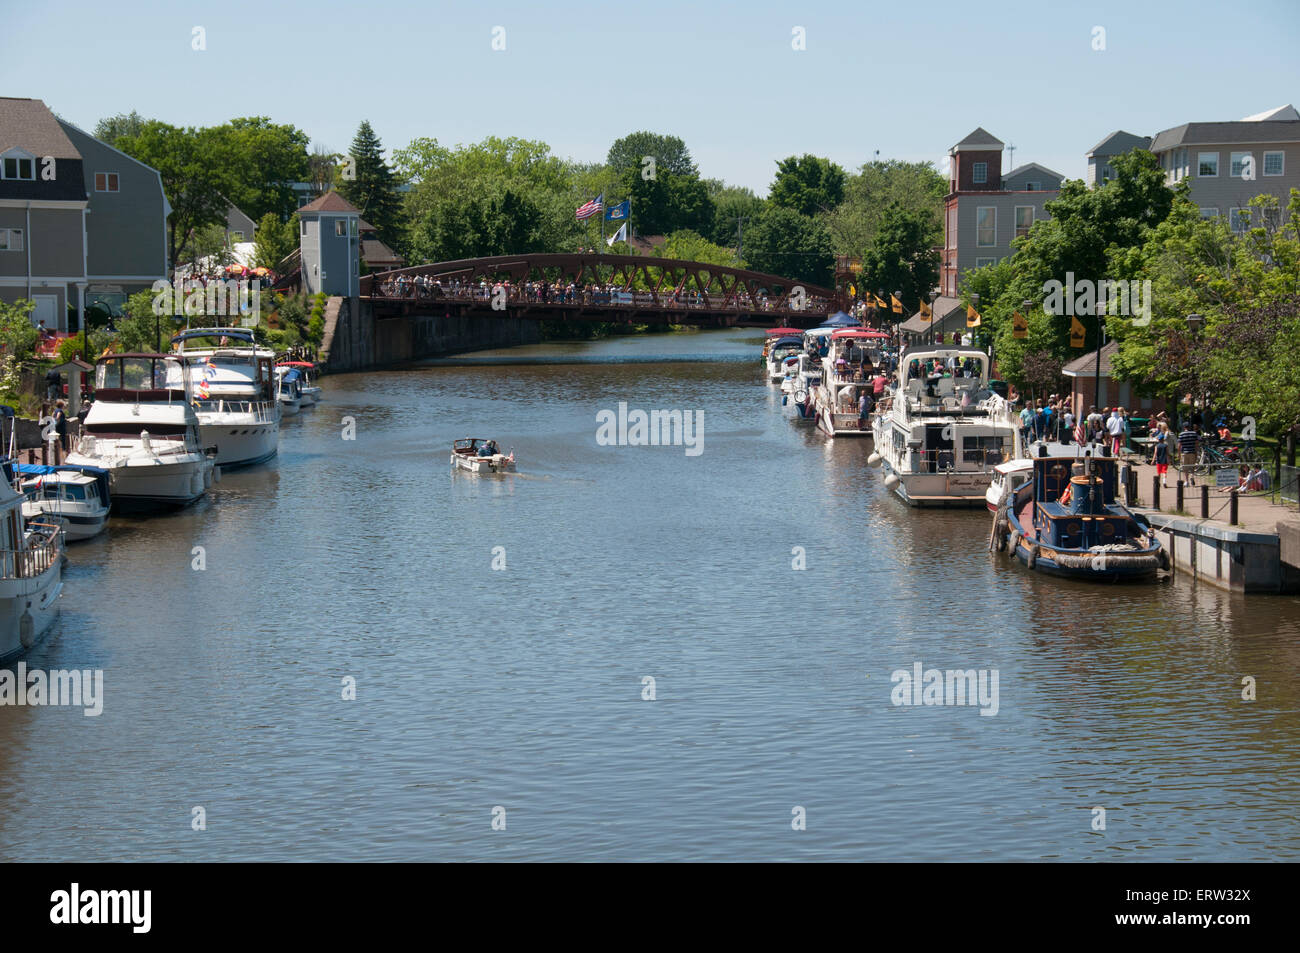 Anlegestelle der Boote am Erie-Kanal in Fairport NY USA Stockfoto